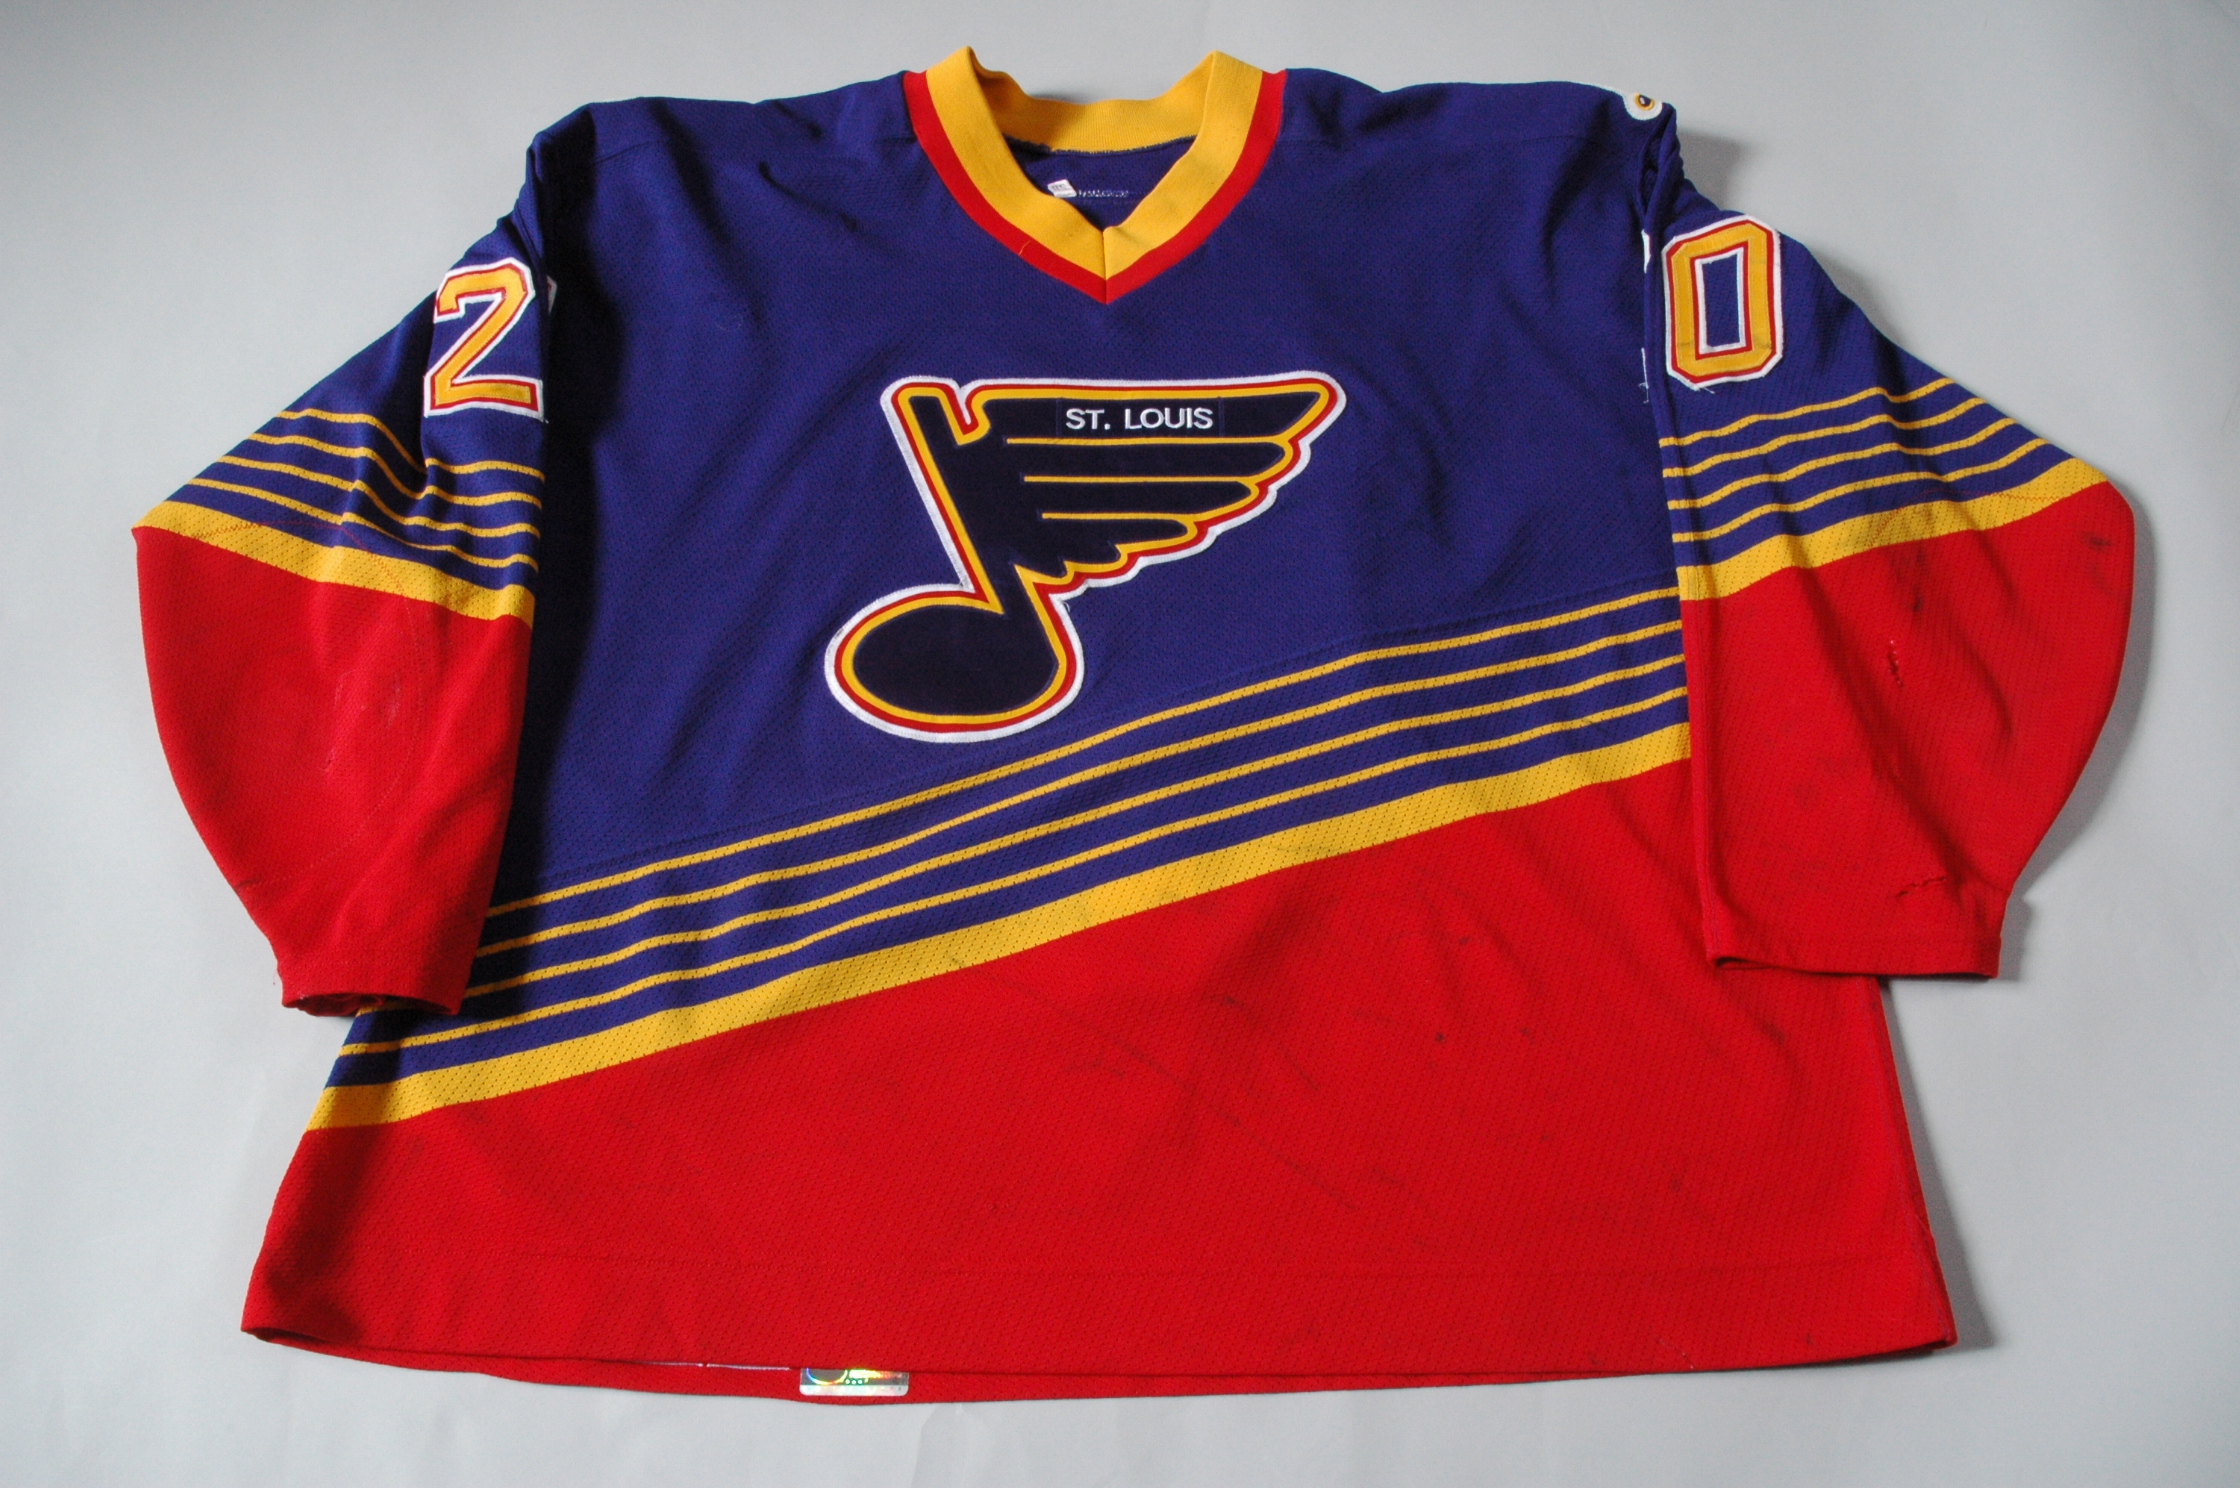 blues ugly jersey